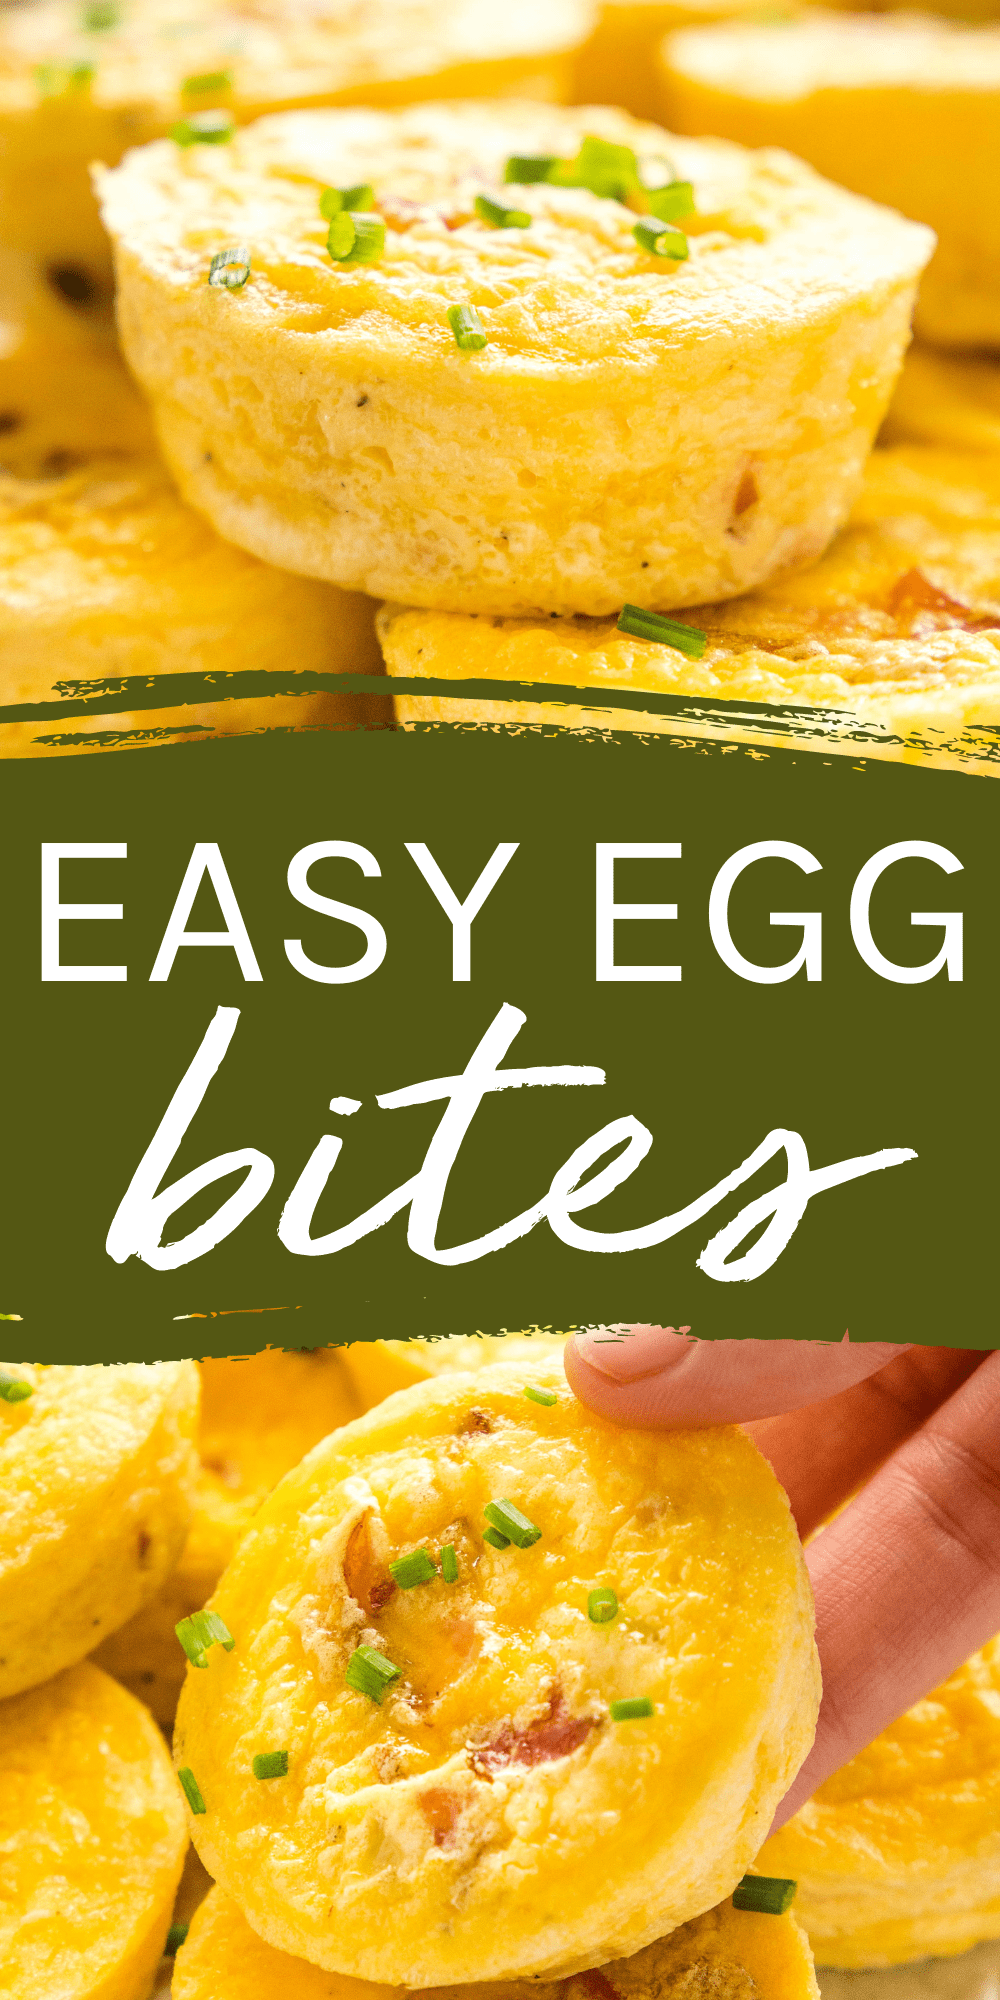 This Egg Bites recipe is the perfect easy make-ahead breakfast - even better than Starbucks egg bites & a healthy, low-carb meal prep recipe with 20 grams of protein and only one gram of carbs per serving. Soft and silky egg bites baked to perfection - no sous vide machine required! Recipe from thebusybaker.ca! #eggbites #eggbitesrecipe #starbuckseggbites #easybreakfast #lowcarbbreakfast #lowcarb #proteinbreakfast #healthybreakfast #starbucksbreakfast #eggrecipe #eggmuffins #ketobreakfast via @busybakerblog